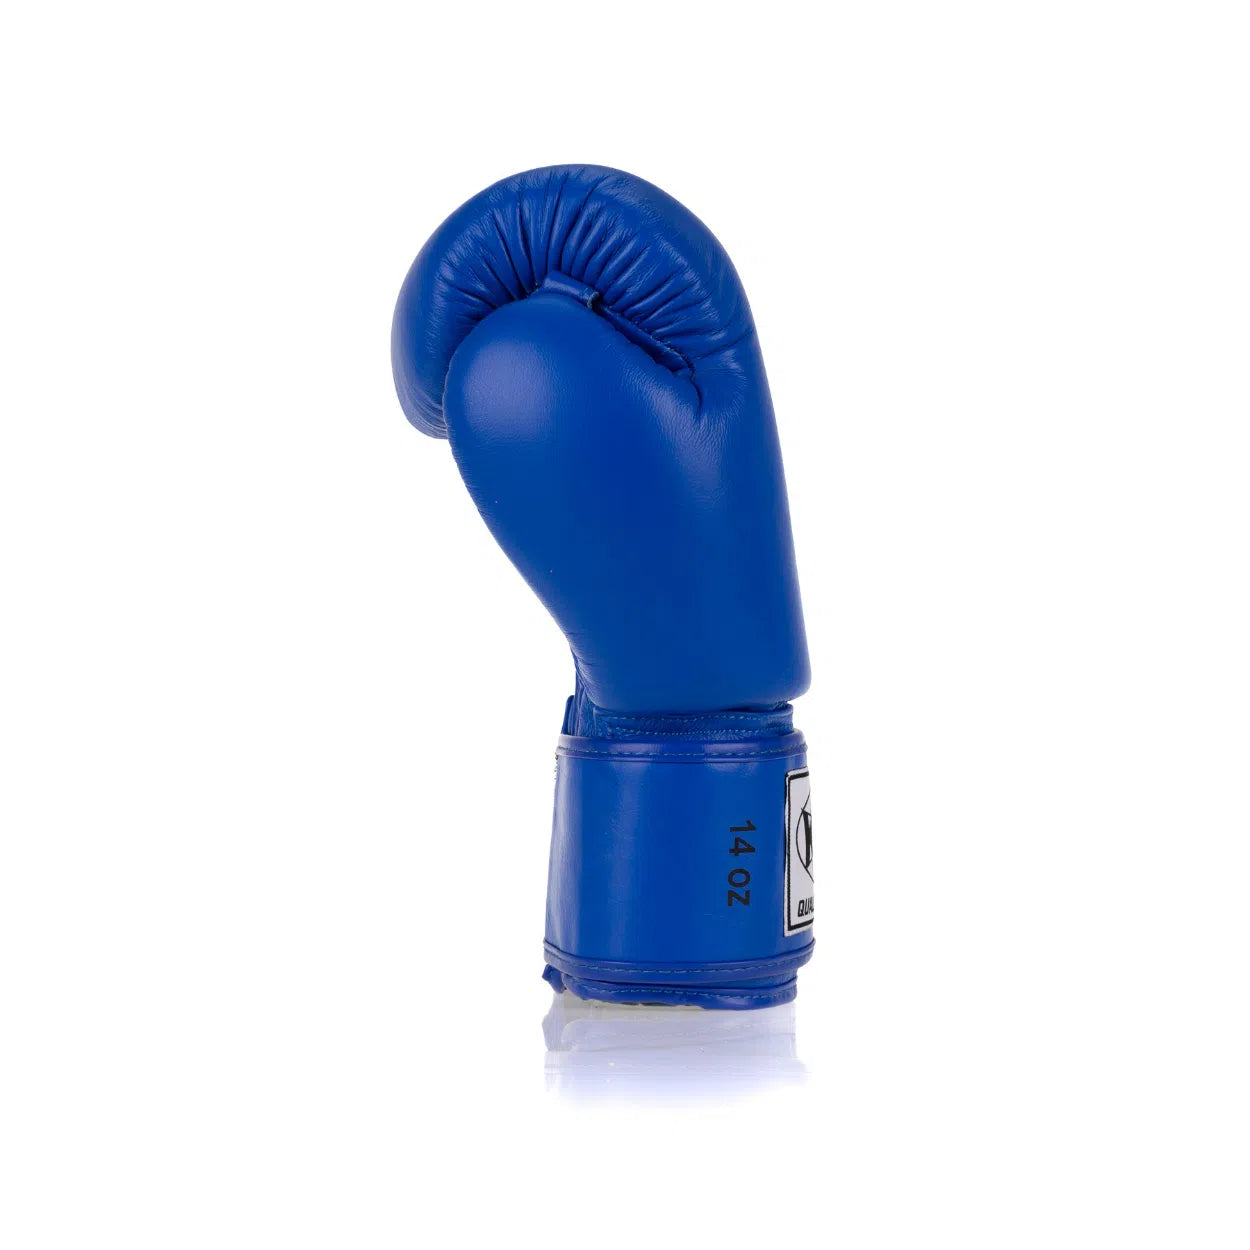 Classic Leather Boxing Glove - Blue